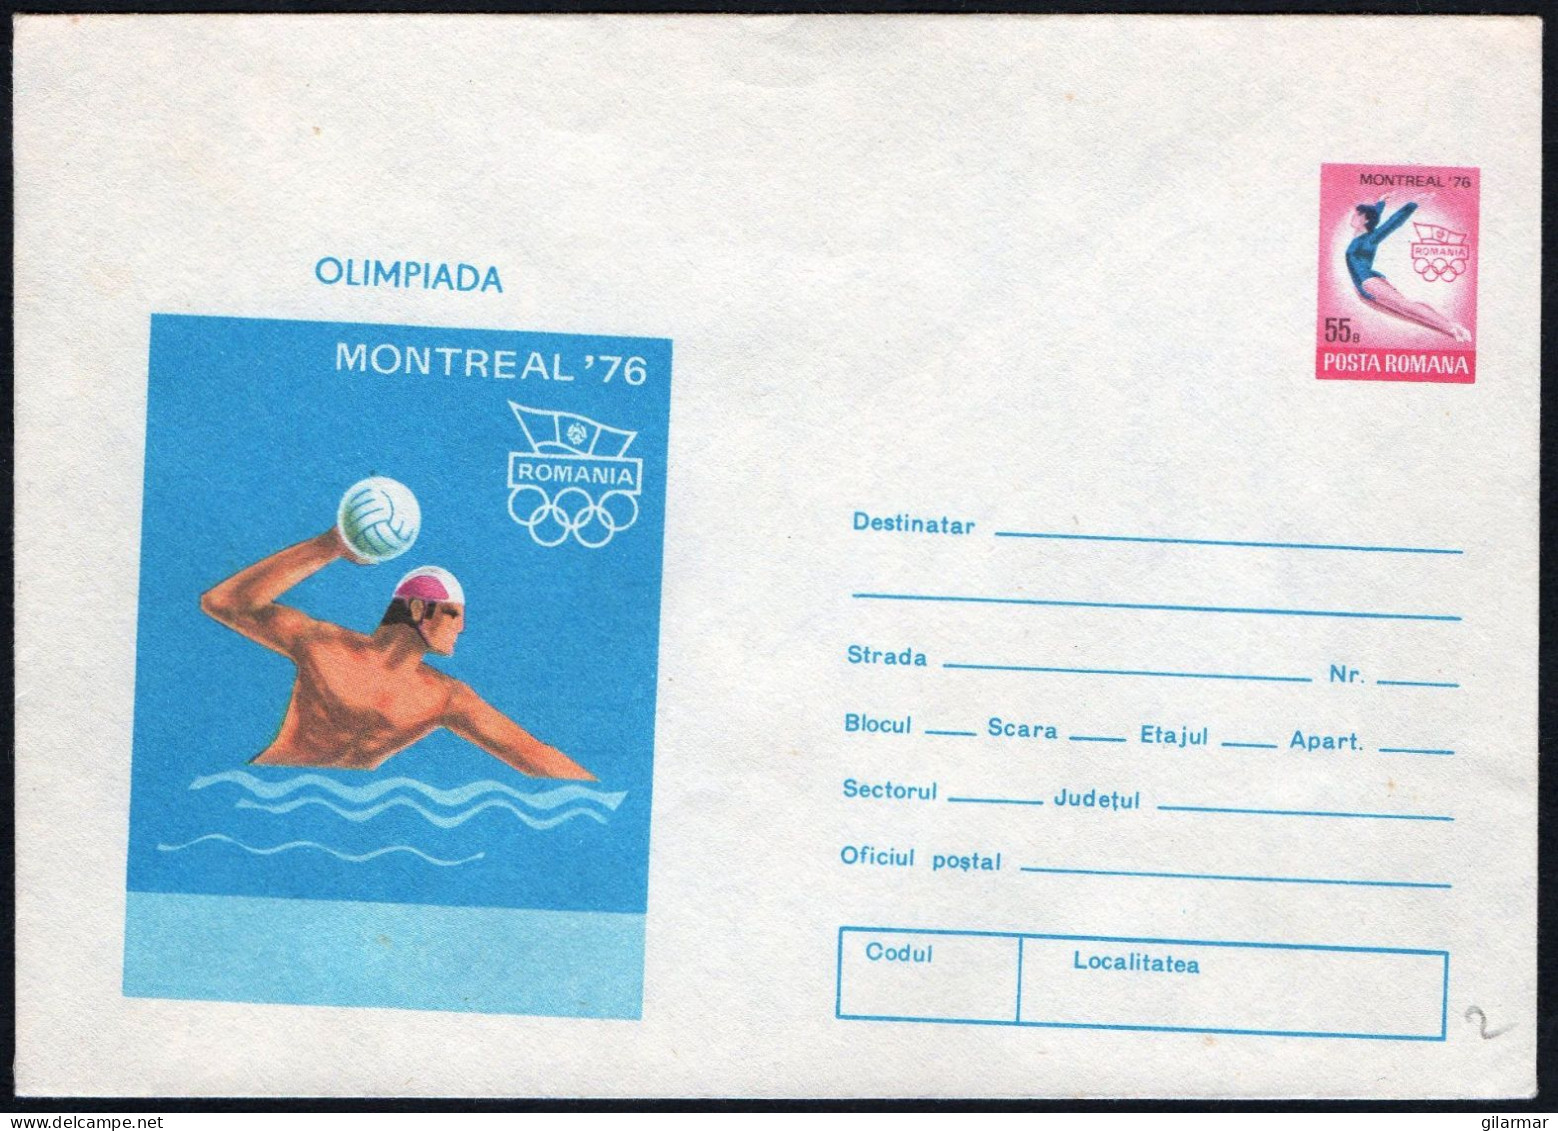 ROMANIA 1976 - OLYMPIC GAMES MONTREAL 1976 - STATIONARY: WATER POLO - MINT - G - Water-Polo